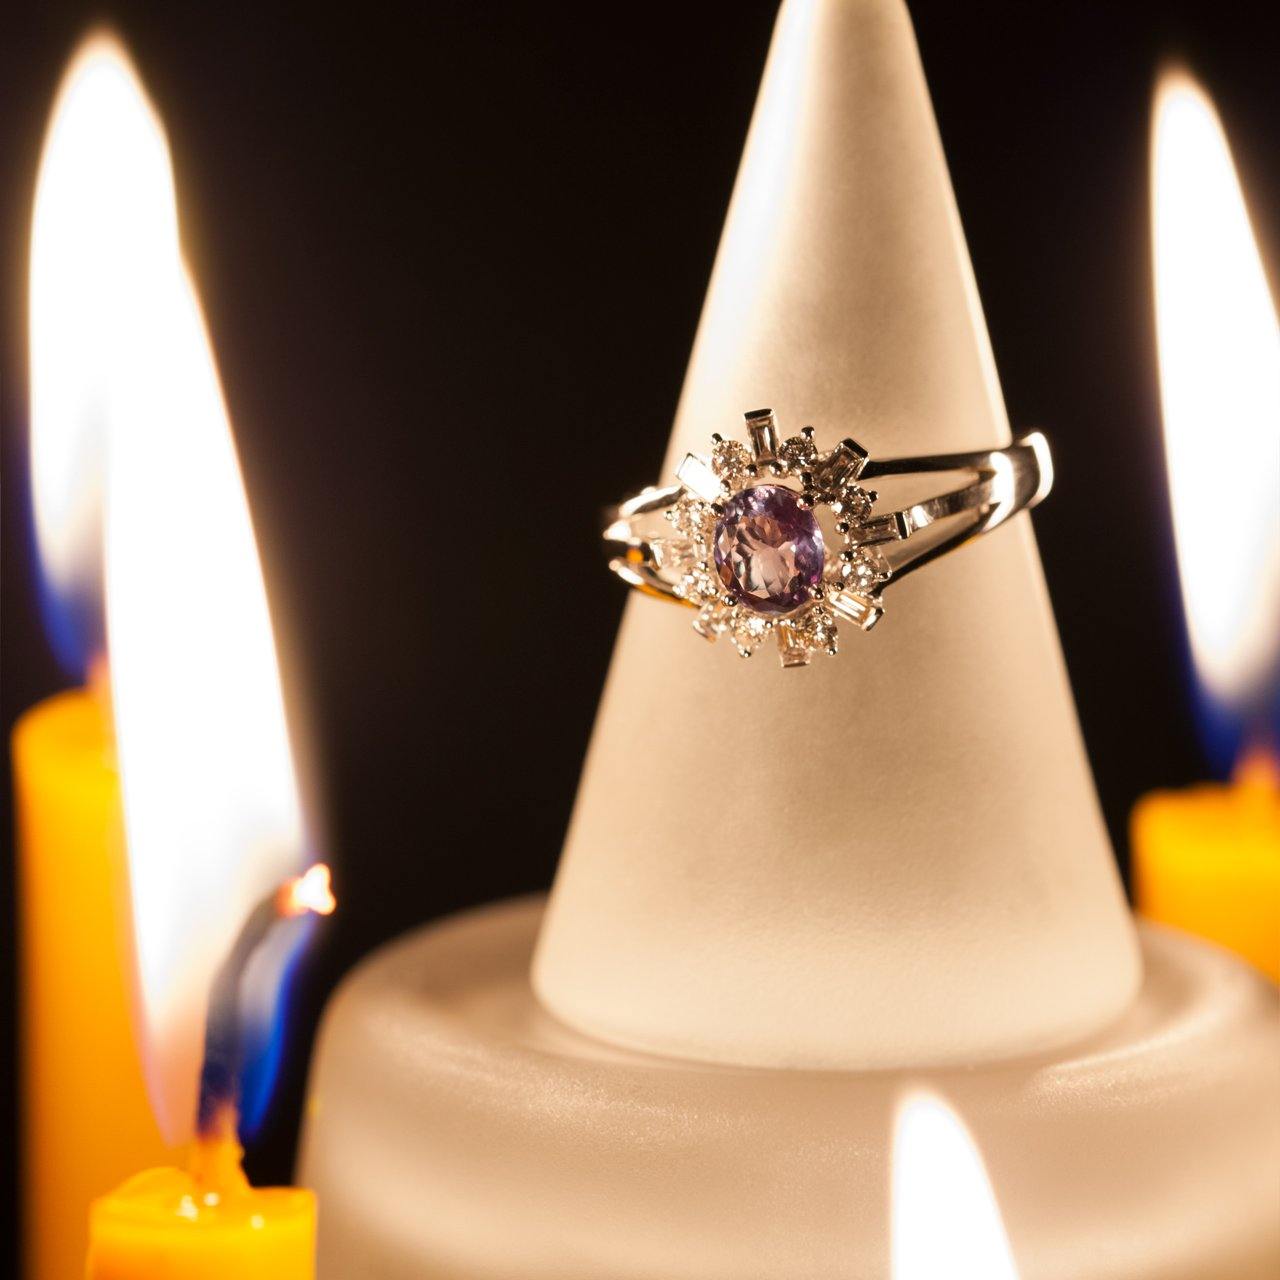 Platinum ring with a 0.78ct alexandrite perched on the edge of a candle for display